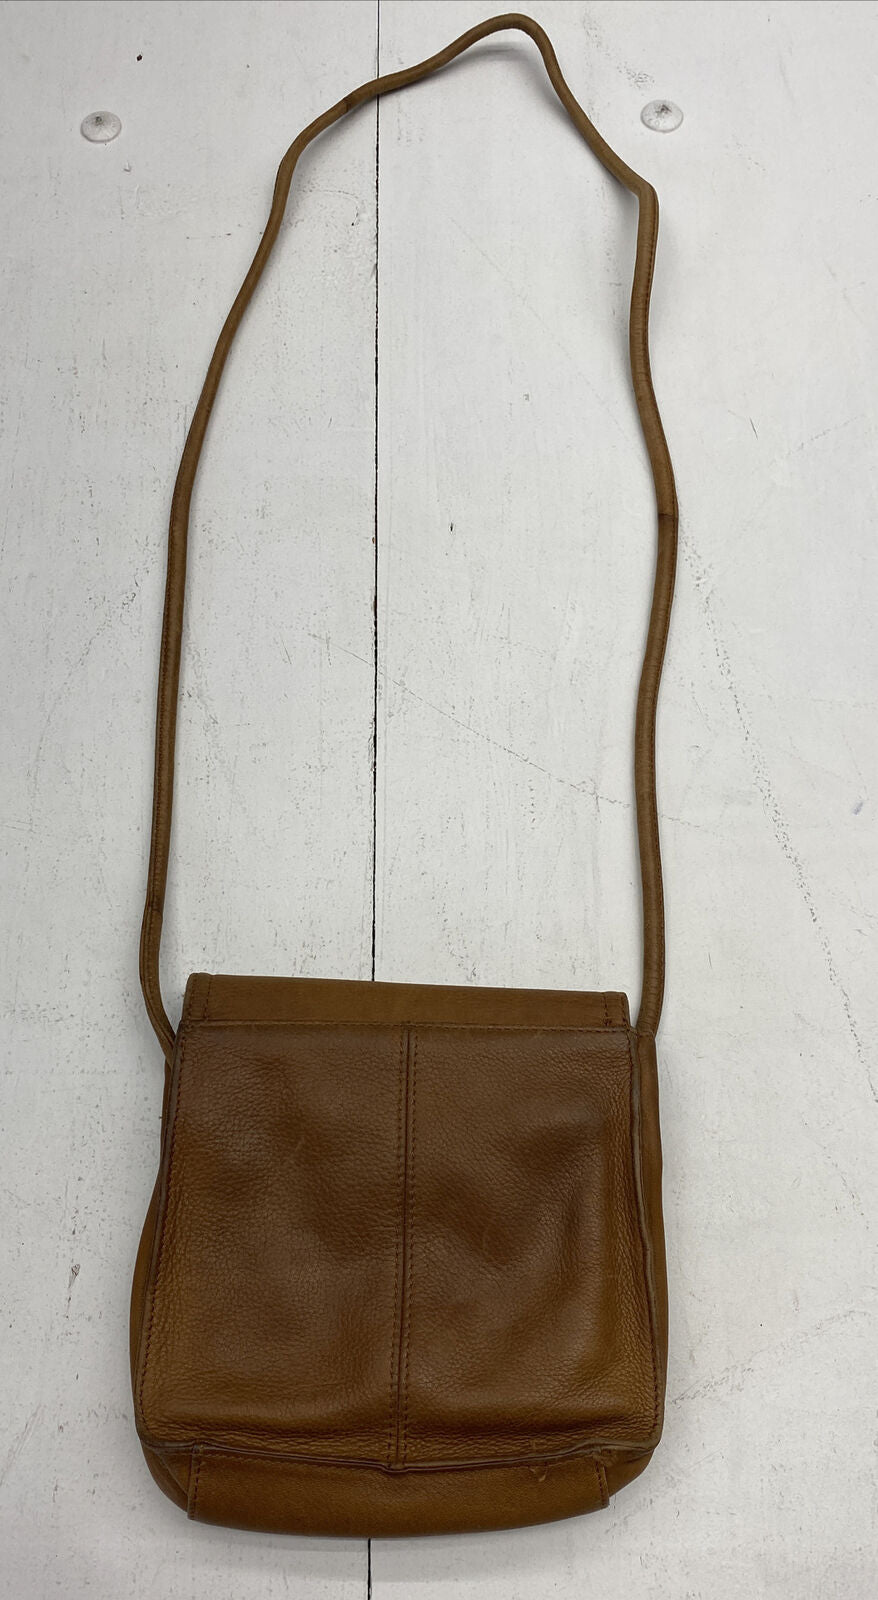 Fossil Voyager Small Brown Leather Crossbody Bag | Brown leather crossbody  bag, Leather crossbody bag, Leather crossbody